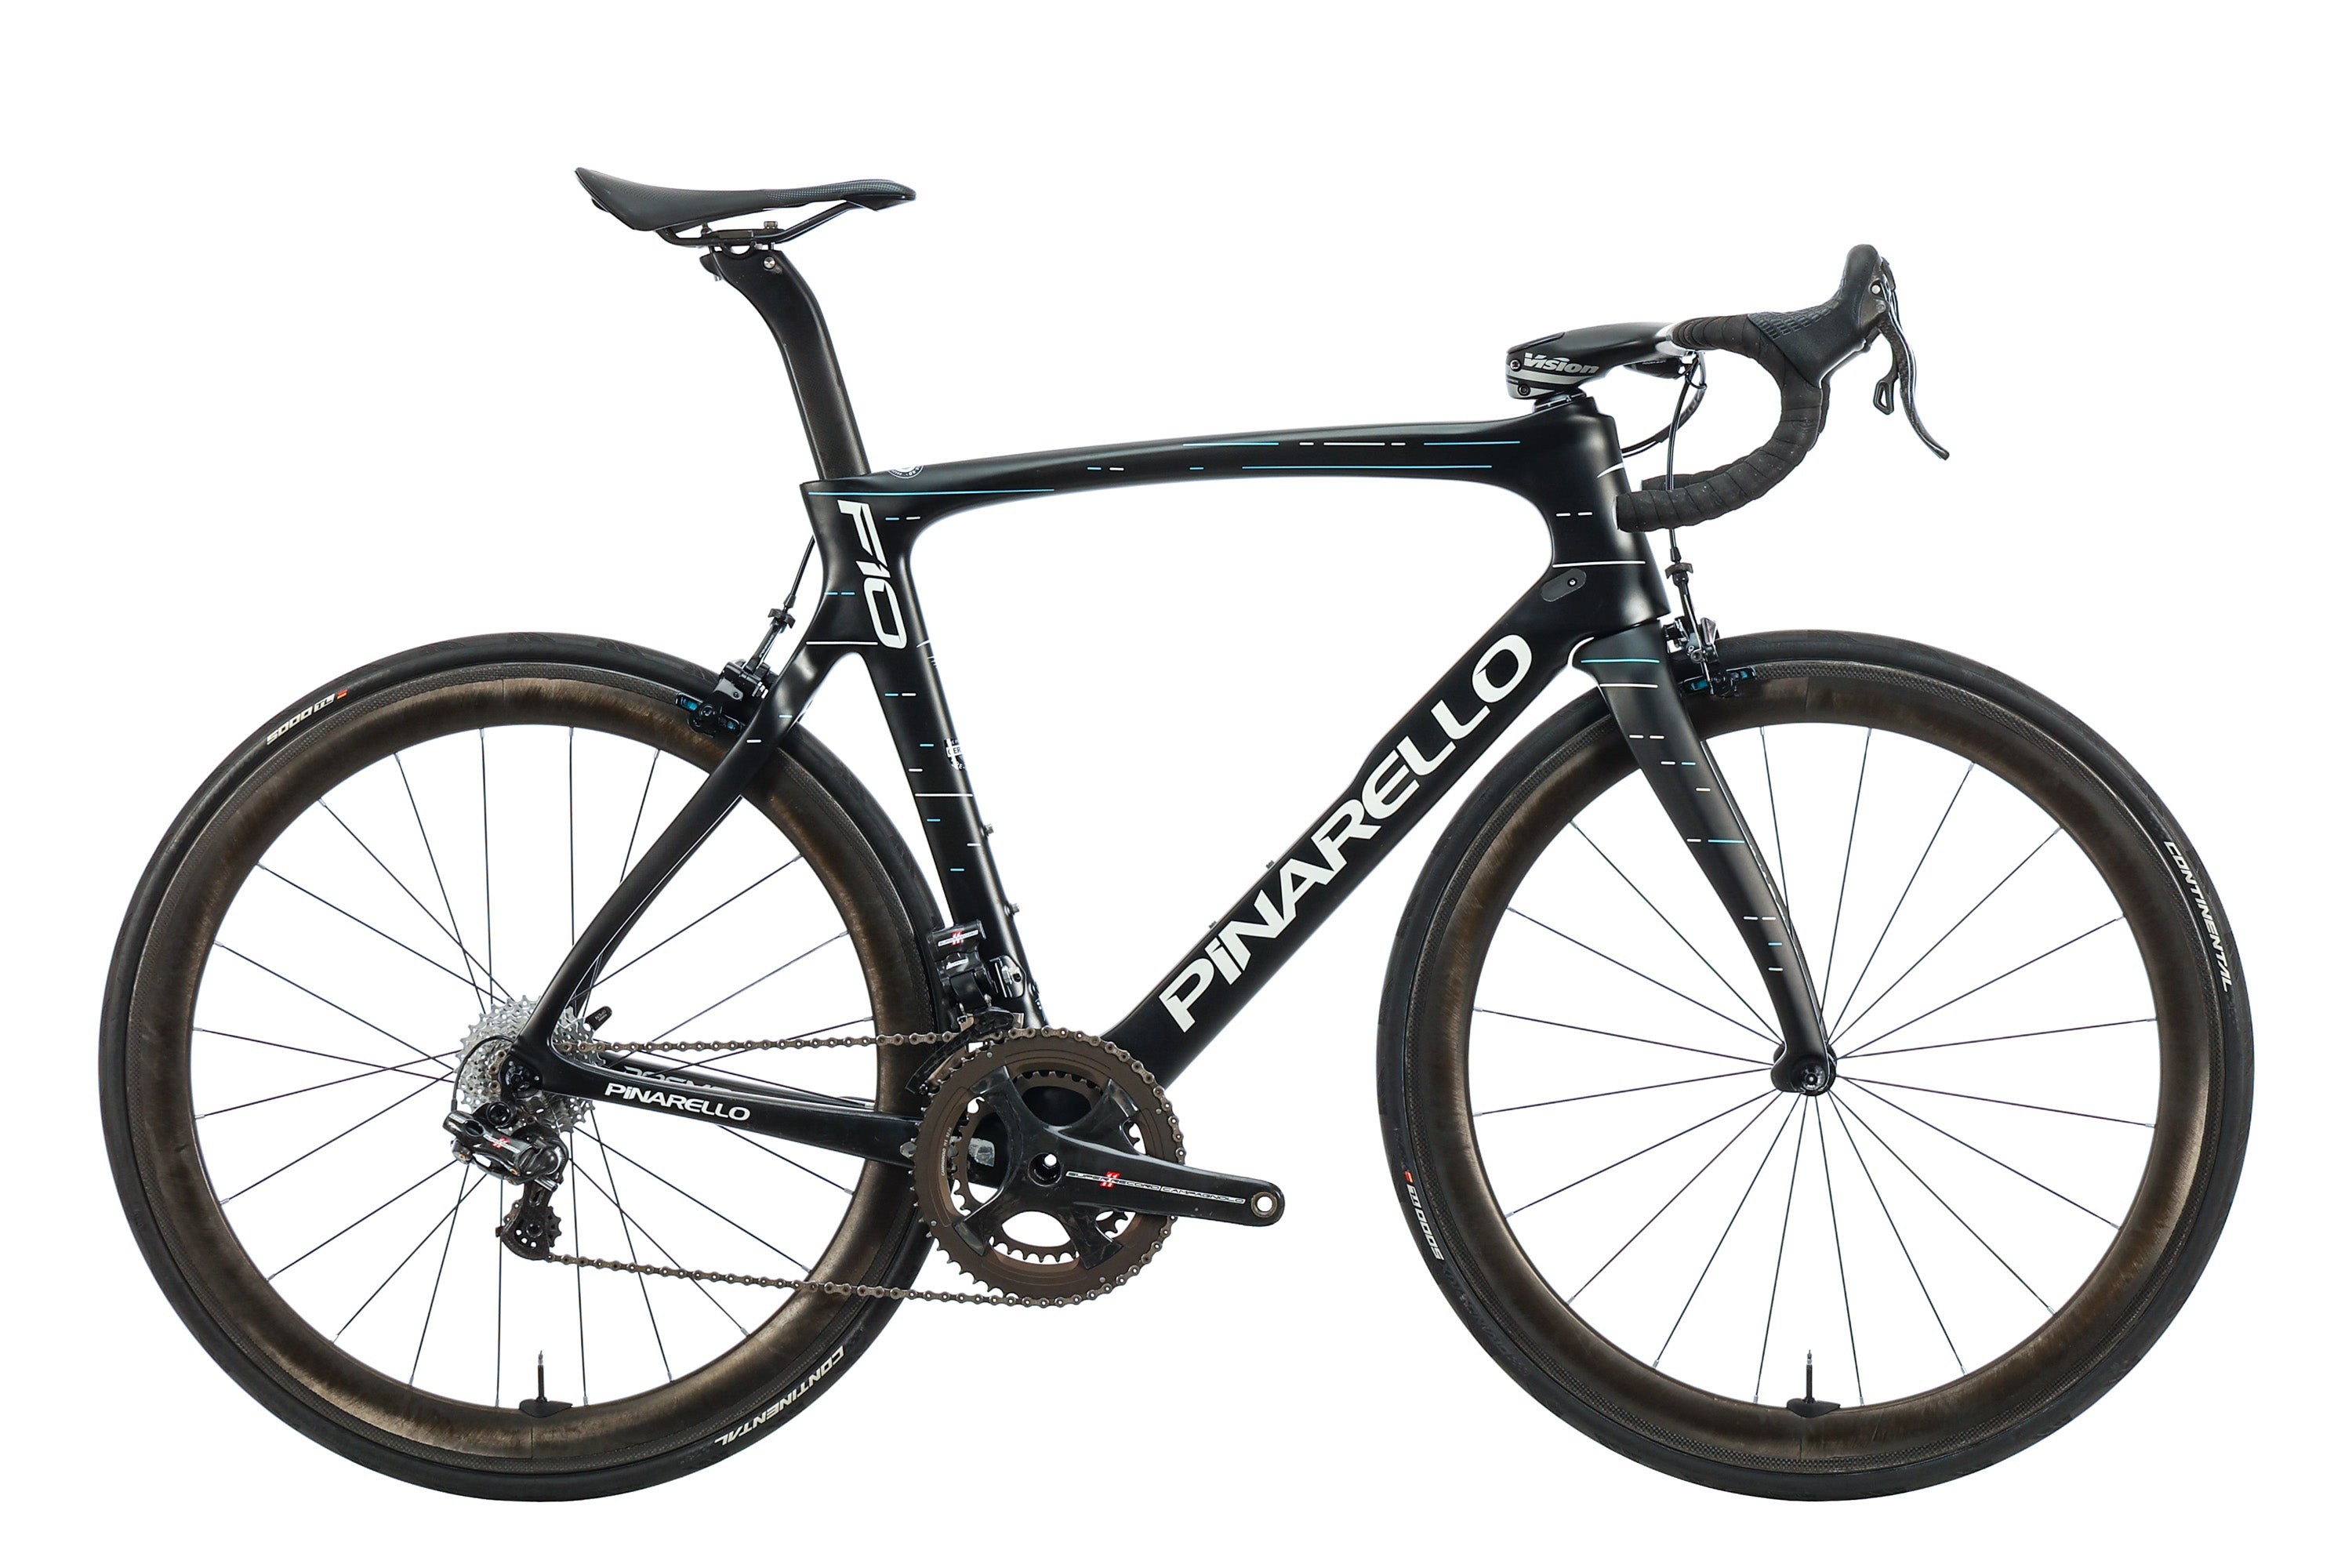 Pinarello Dogma F10 Bike Review: a High-End Bike That Delivers